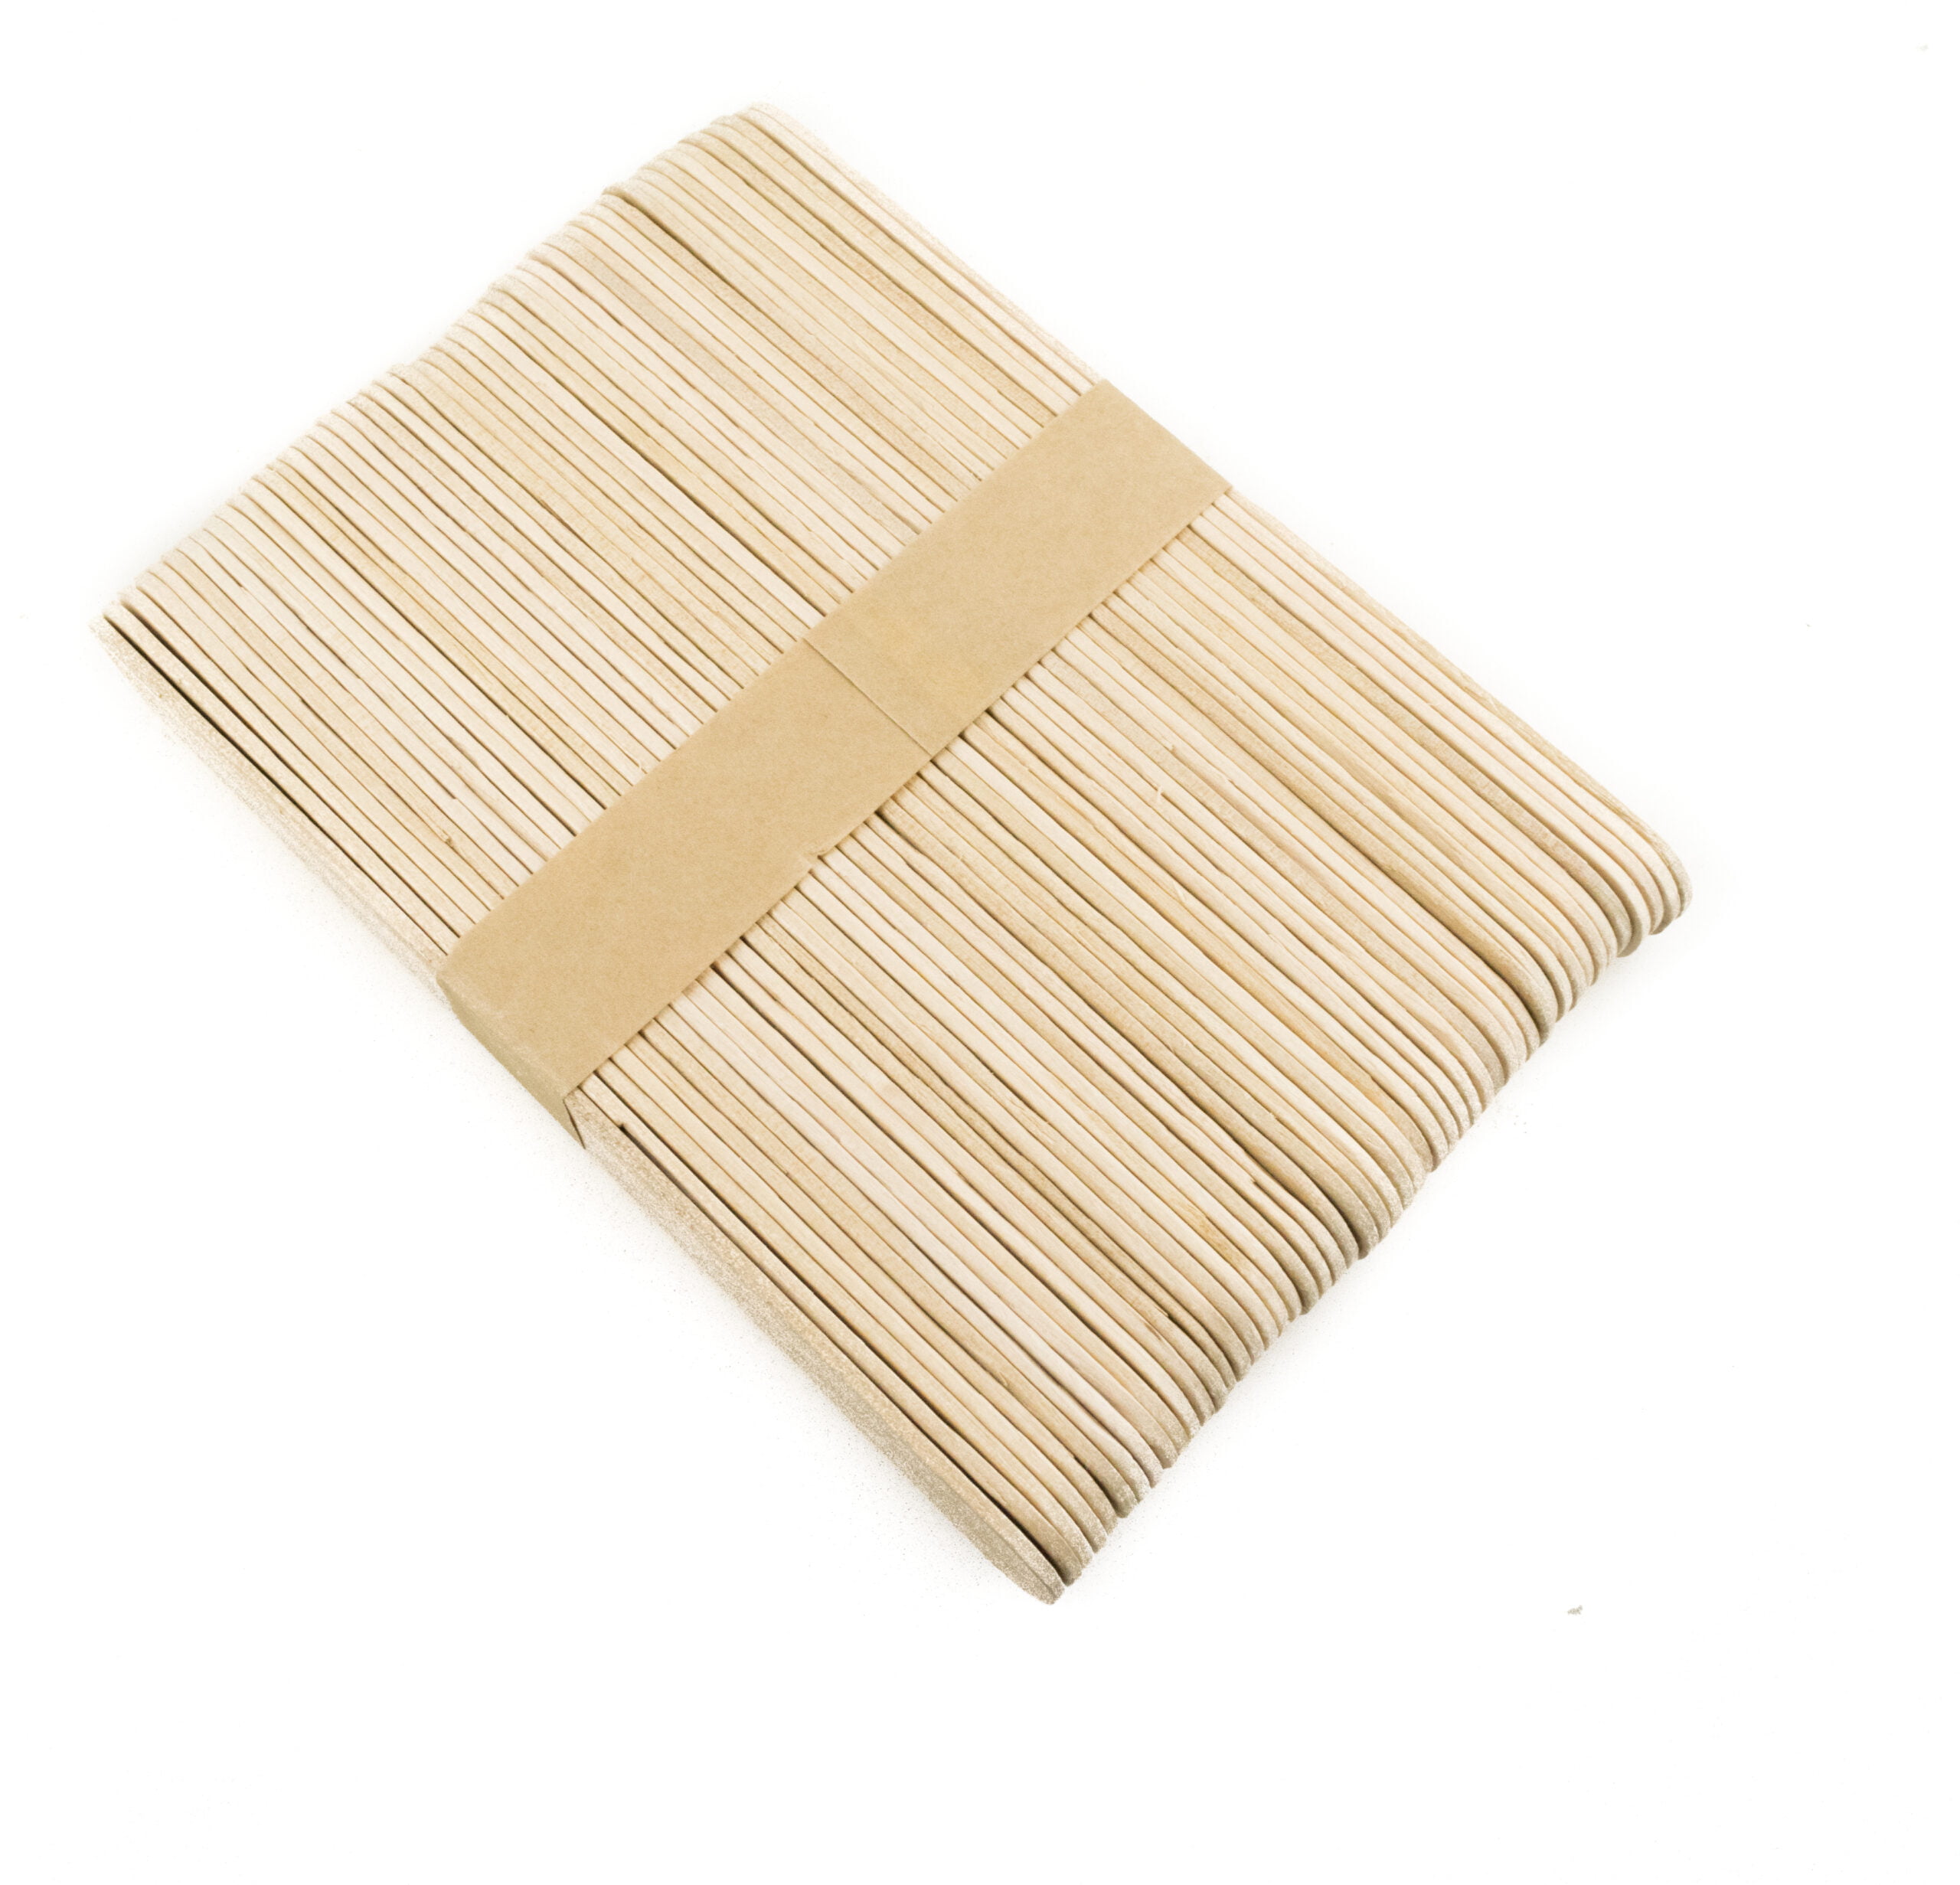 Wooden Stirrers Pack Of 50 2